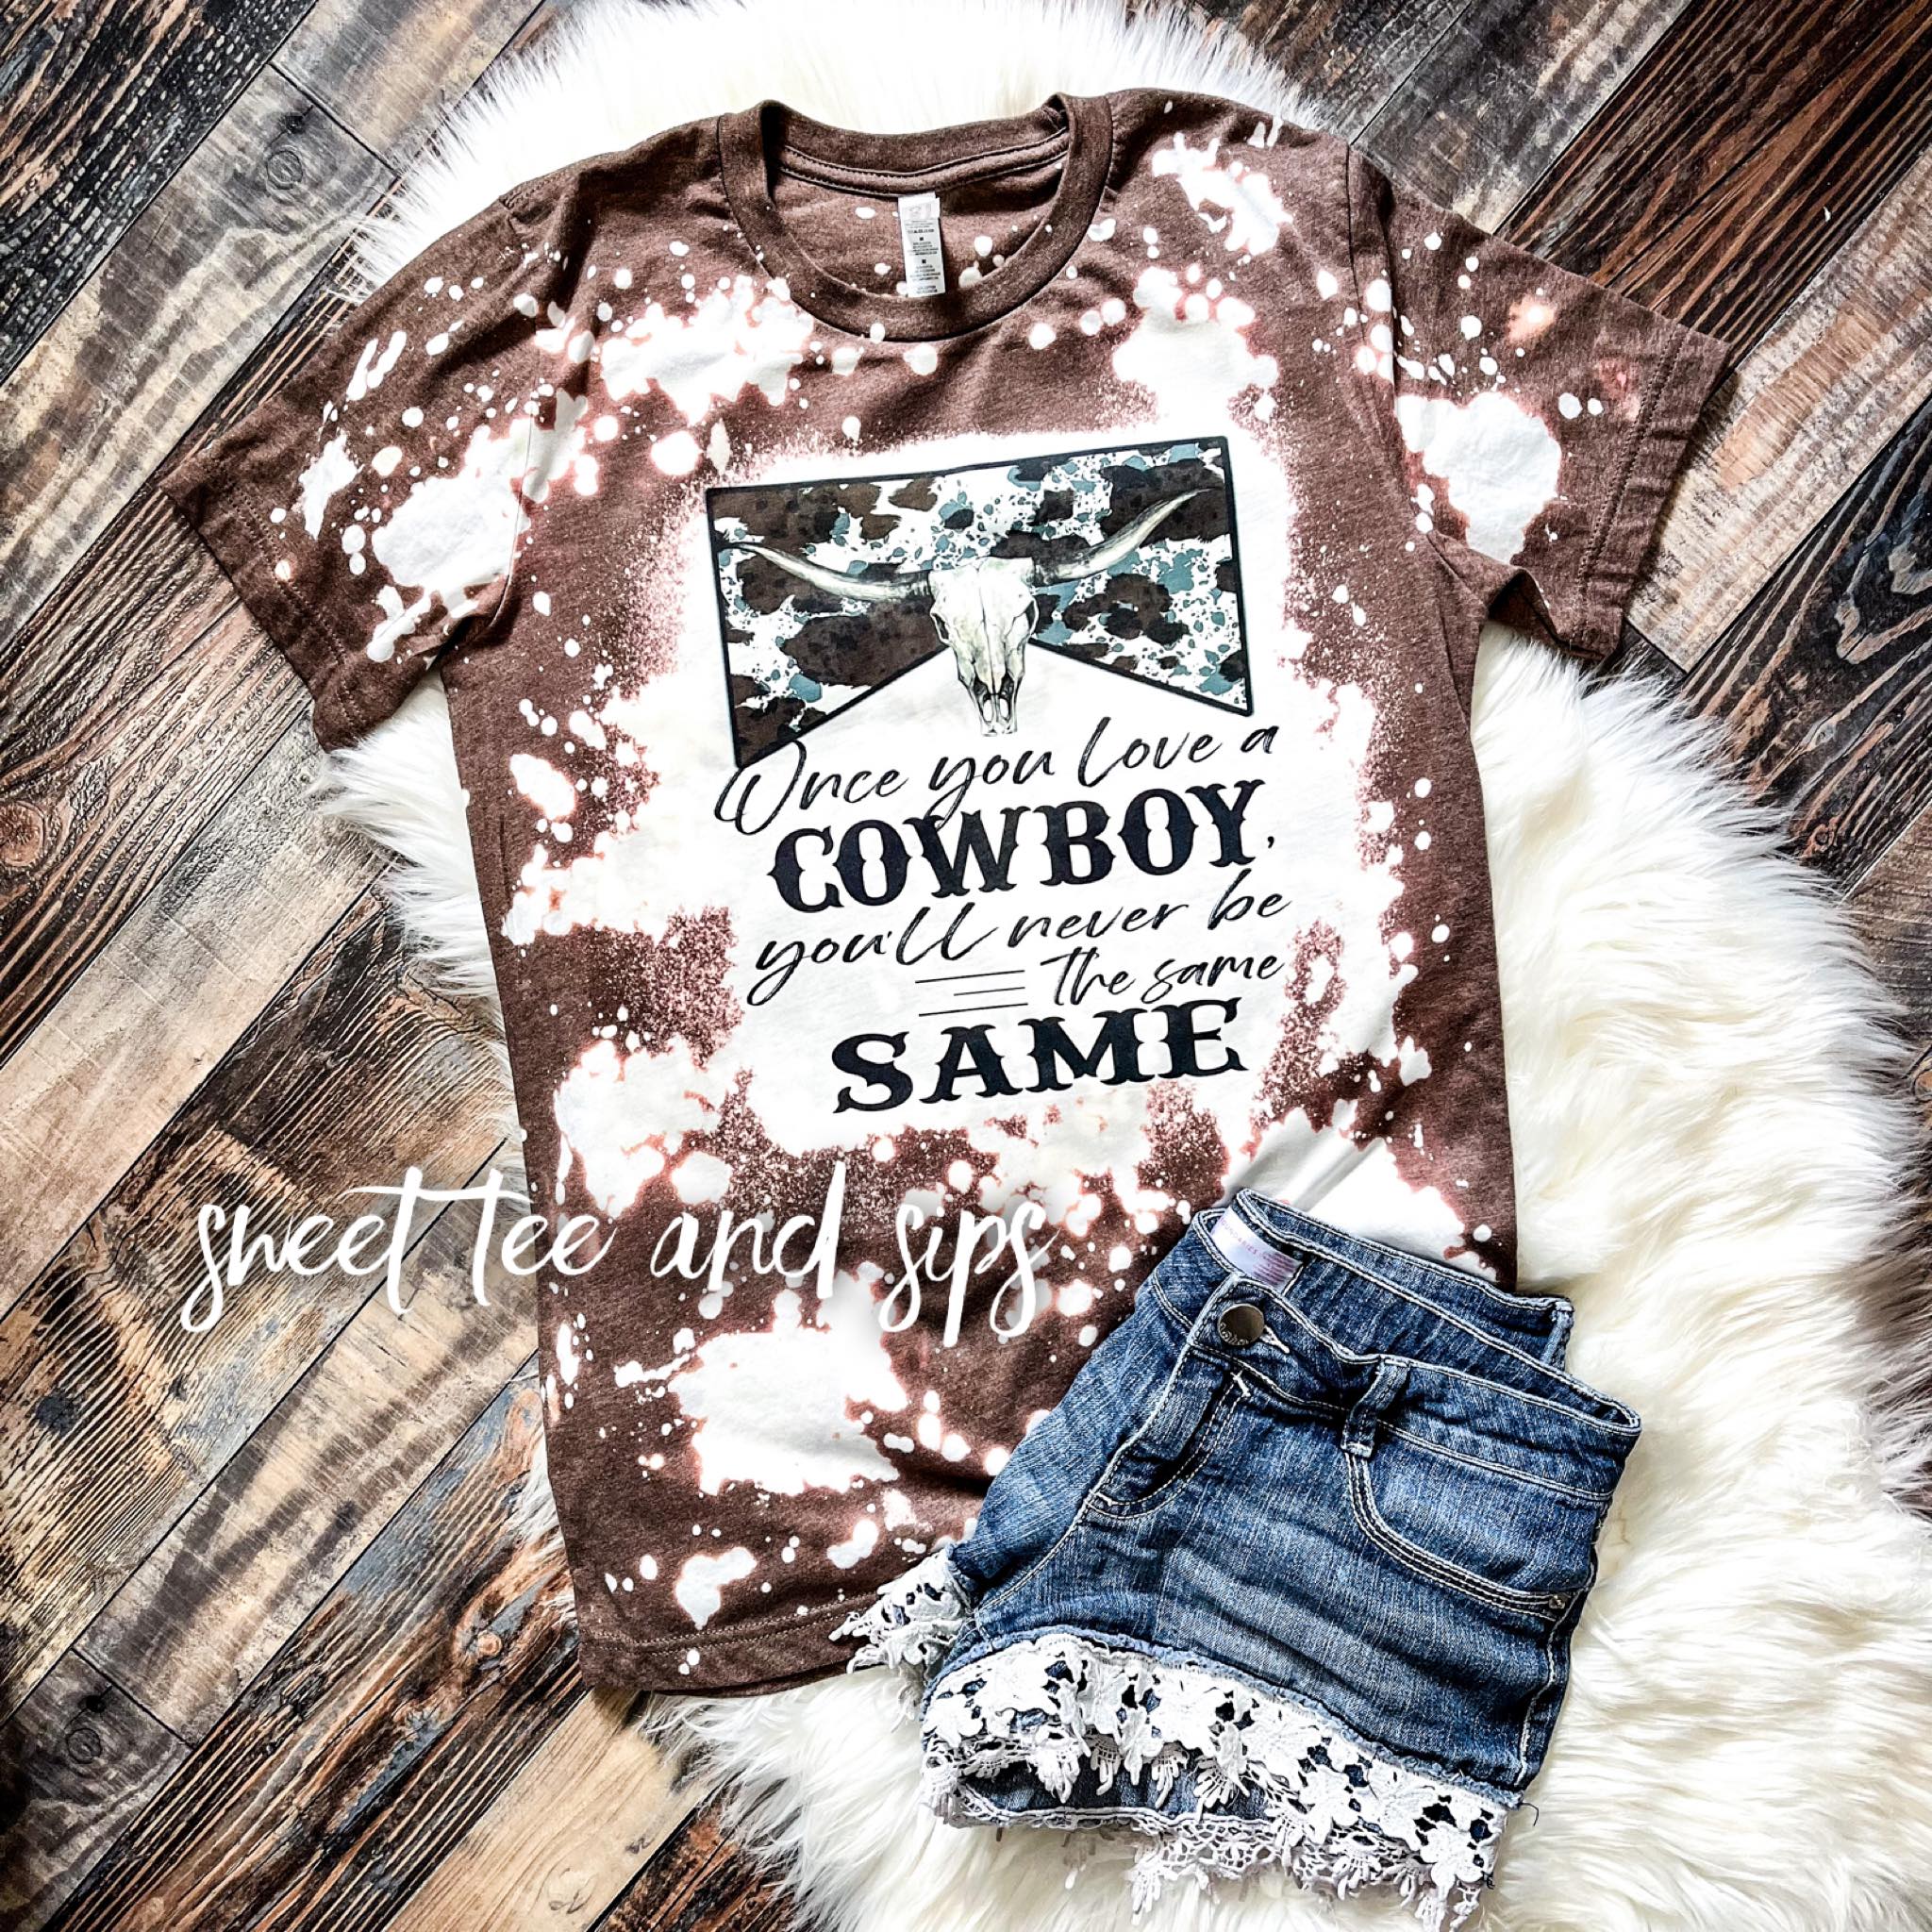 Once you love a cowboy, Western shirt, Cowhide shirt, Country